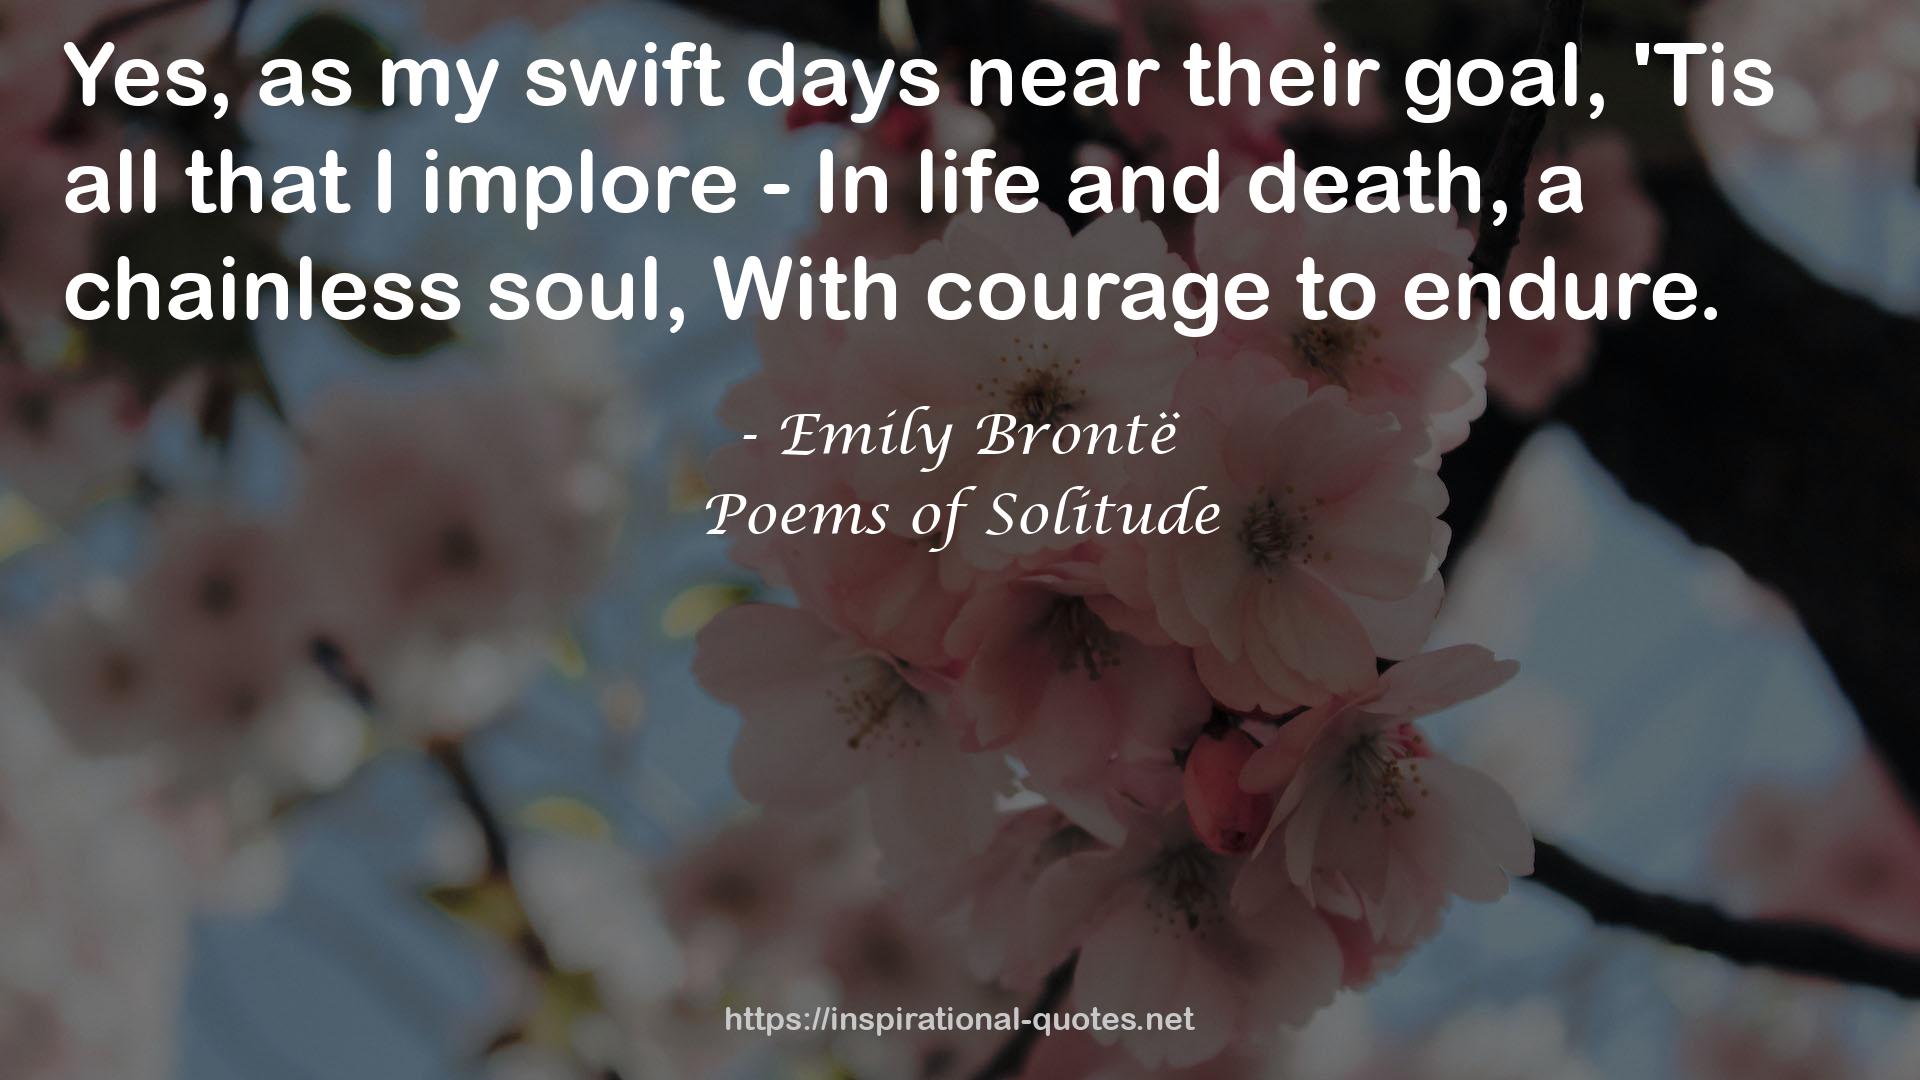 Poems of Solitude QUOTES